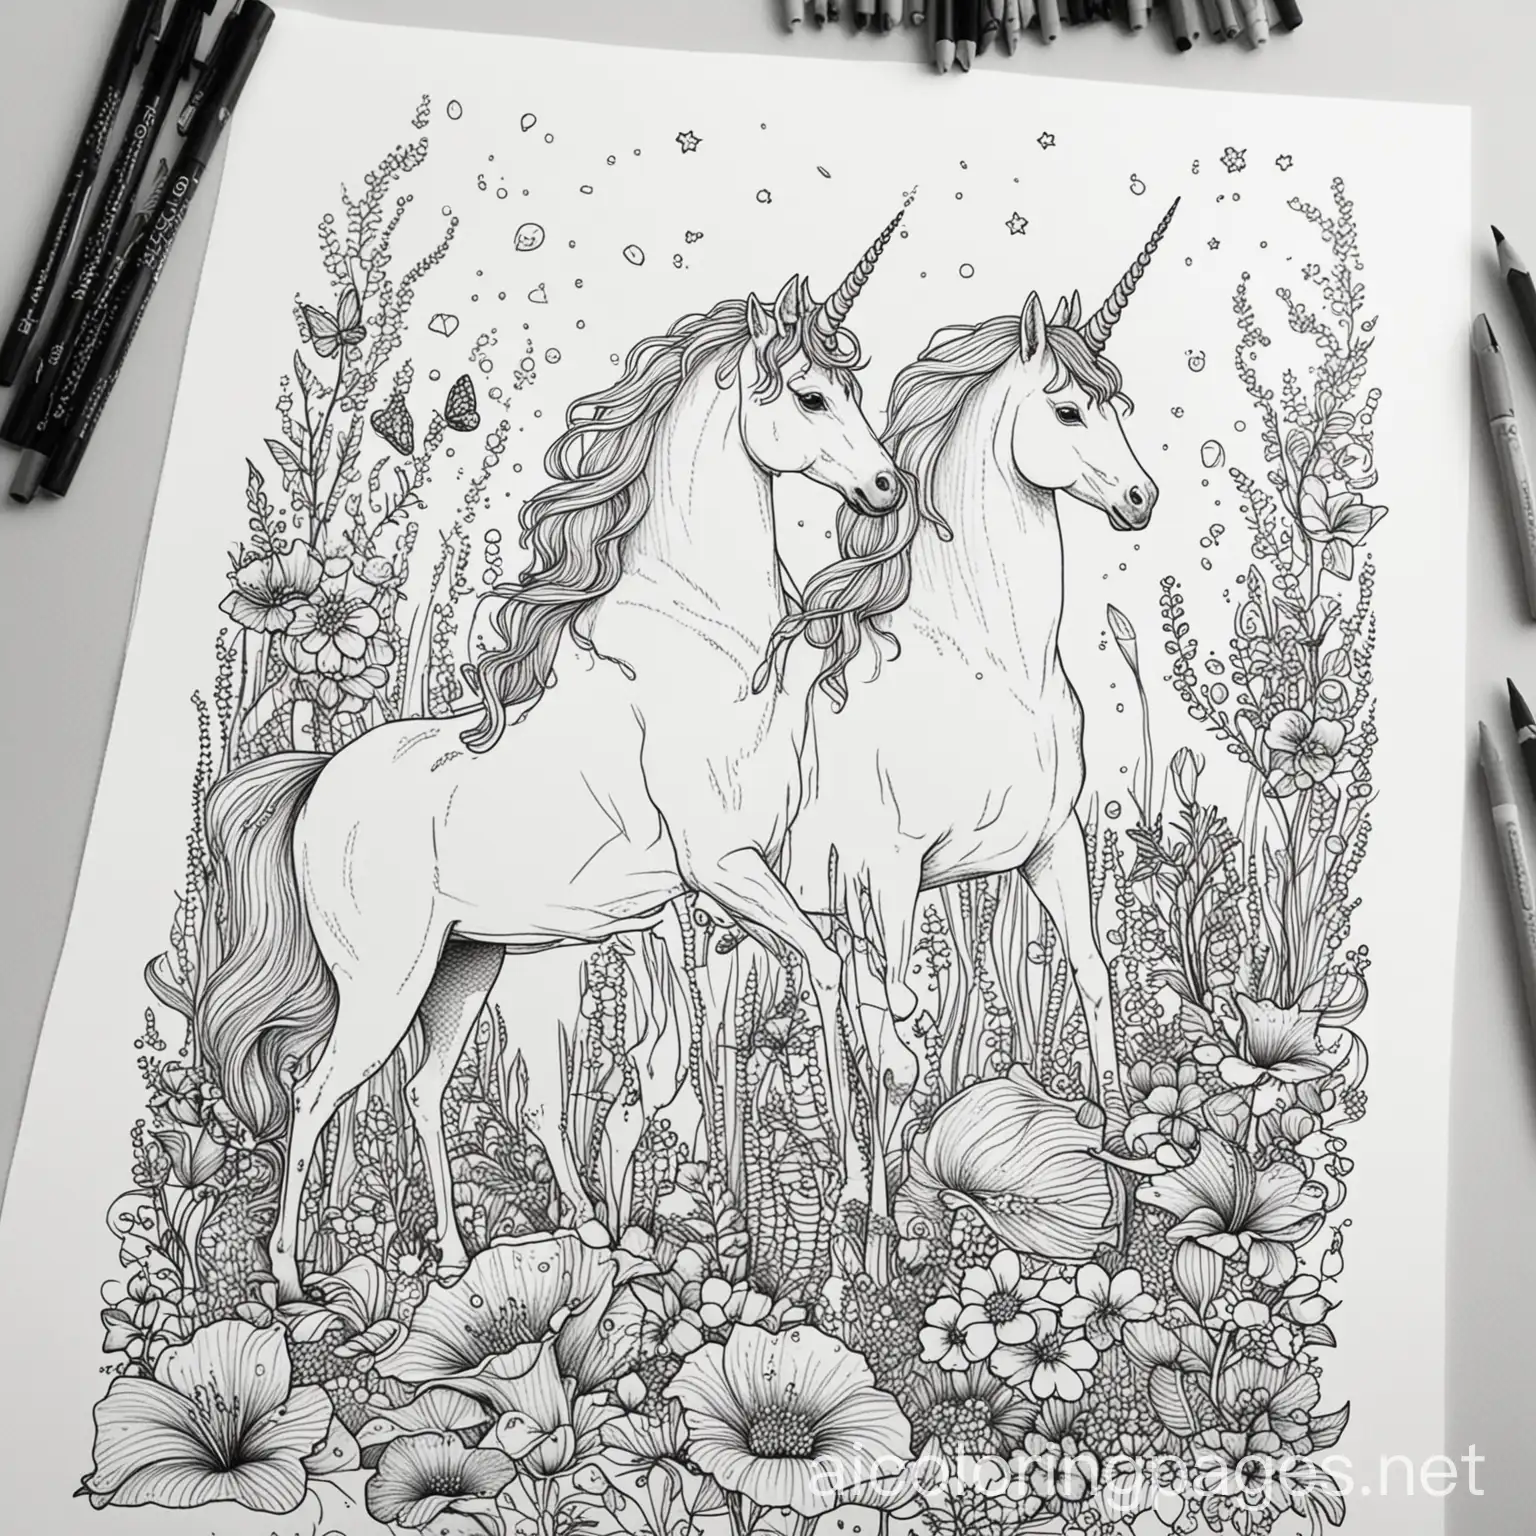 Unicorns with mermaids 
, Coloring Page, black and white, line art, white background, Simplicity, Ample White Space. The background of the coloring page is plain white to make it easy for young children to color within the lines. The outlines of all the subjects are easy to distinguish, making it simple for kids to color without too much difficulty